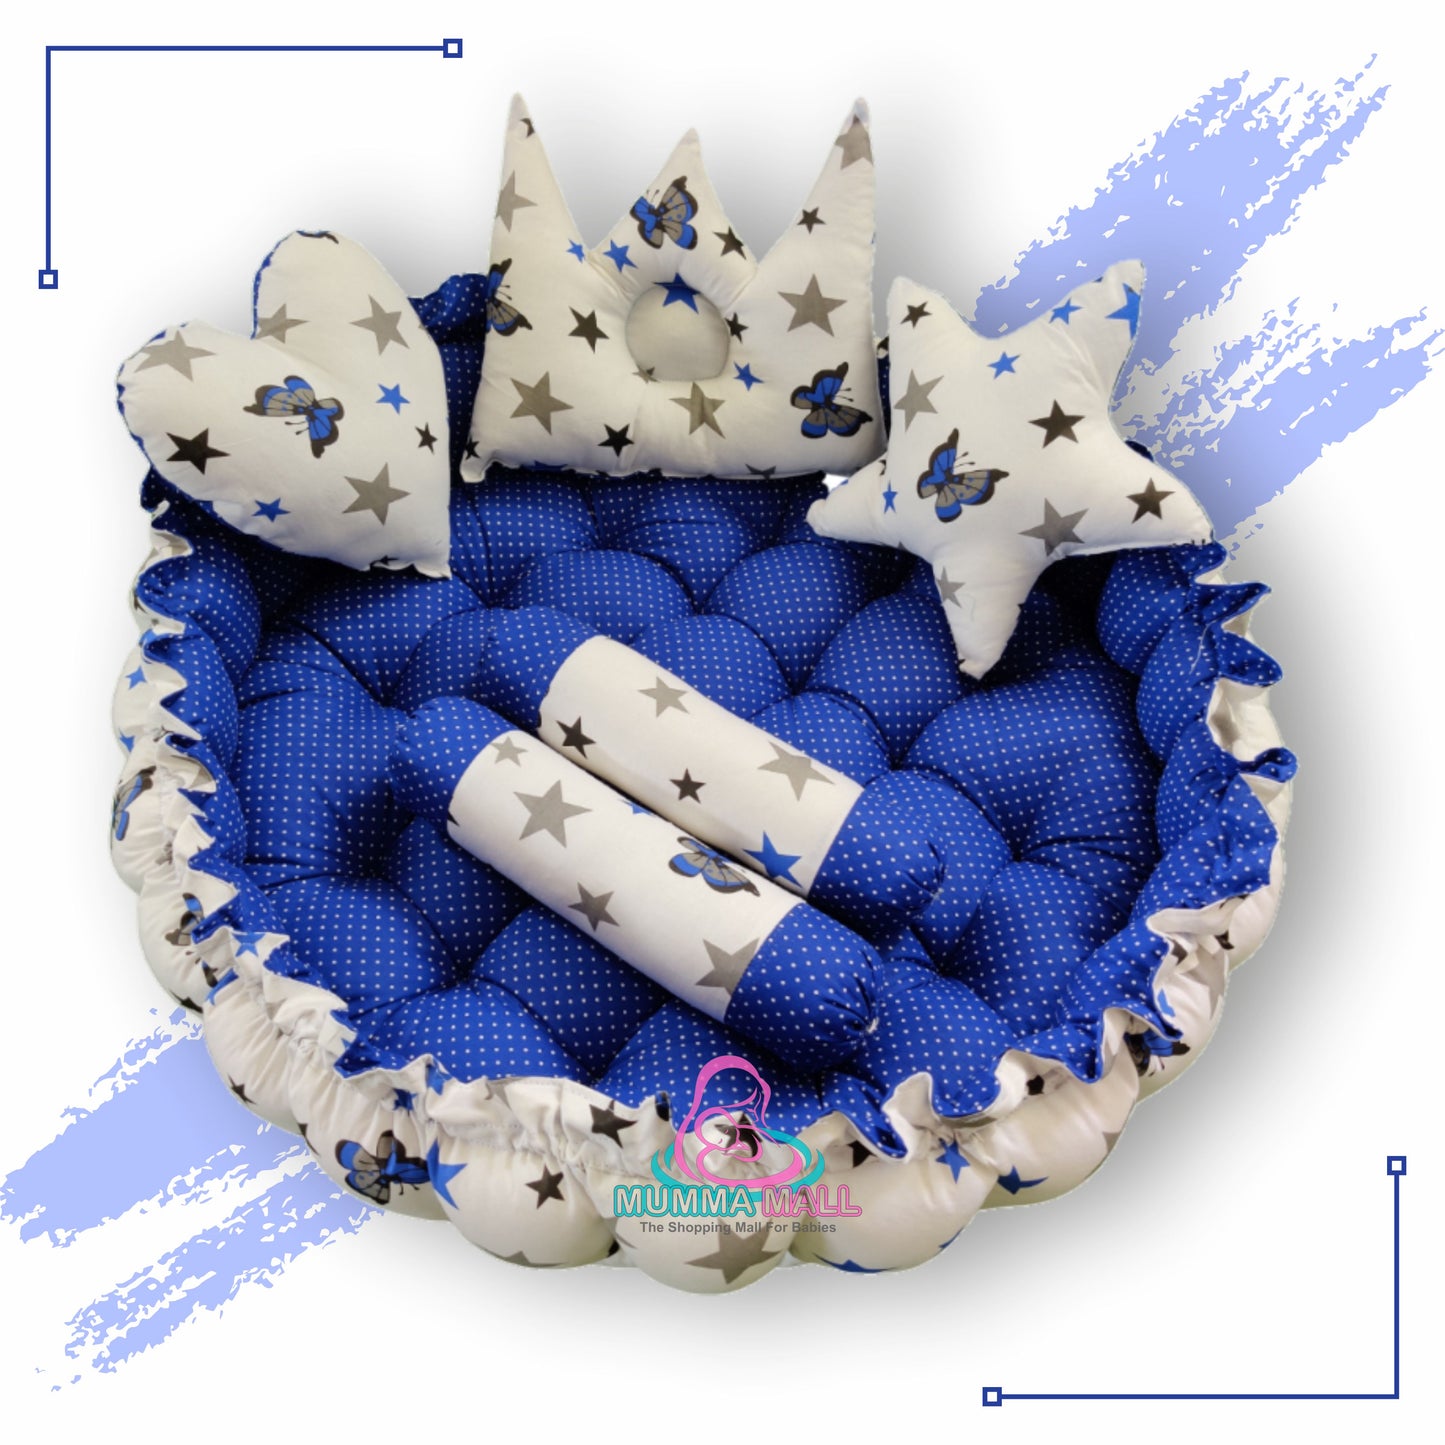 Round baby tub bed with blanket and set of 5 pillows as neck support, side support and toy (Blue and White)